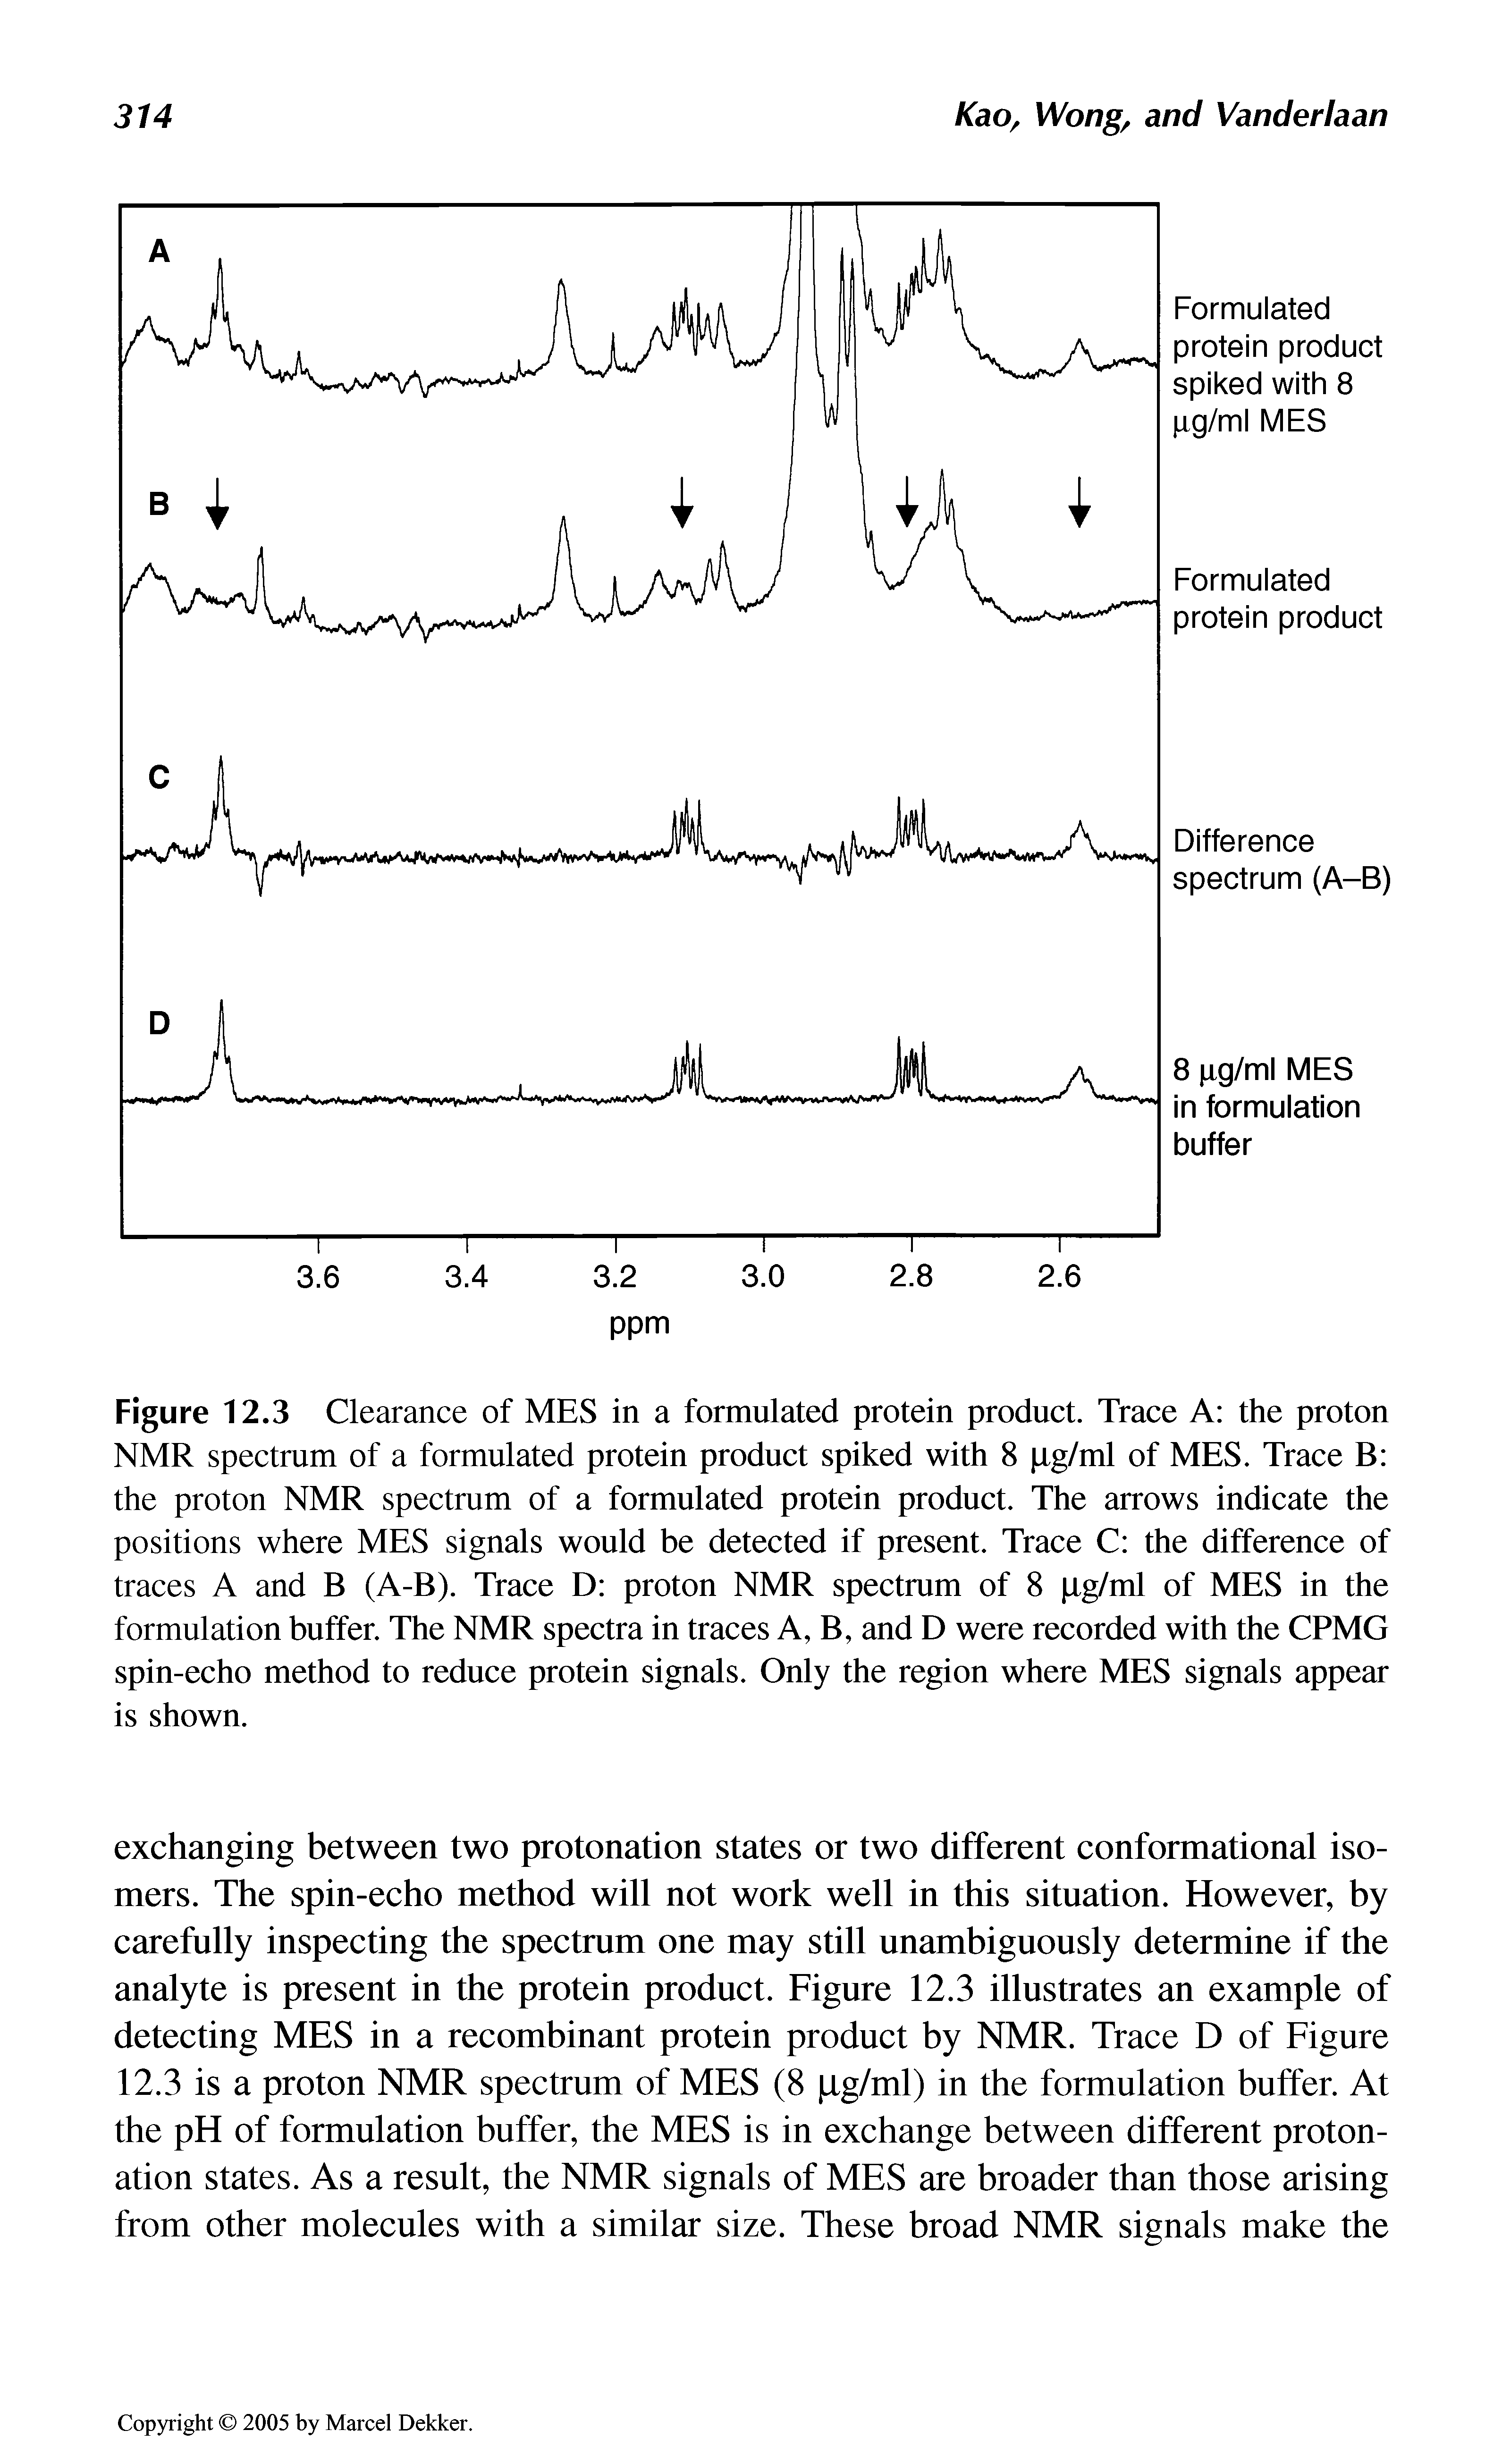 Figure 12.3 Clearance of MES in a formulated protein product. Trace A the proton NMR spectrum of a formulated protein product spiked with 8 jig/ml of MES. Trace B the proton NMR spectrum of a formulated protein product. The arrows indicate the positions where MES signals would be detected if present. Trace C the difference of traces A and B (A-B). Trace D proton NMR spectrum of 8 ftg/ml of MES in the formulation buffer. The NMR spectra in traces A, B, and D were recorded with the CPMG spin-echo method to reduce protein signals. Only the region where MES signals appear is shown.